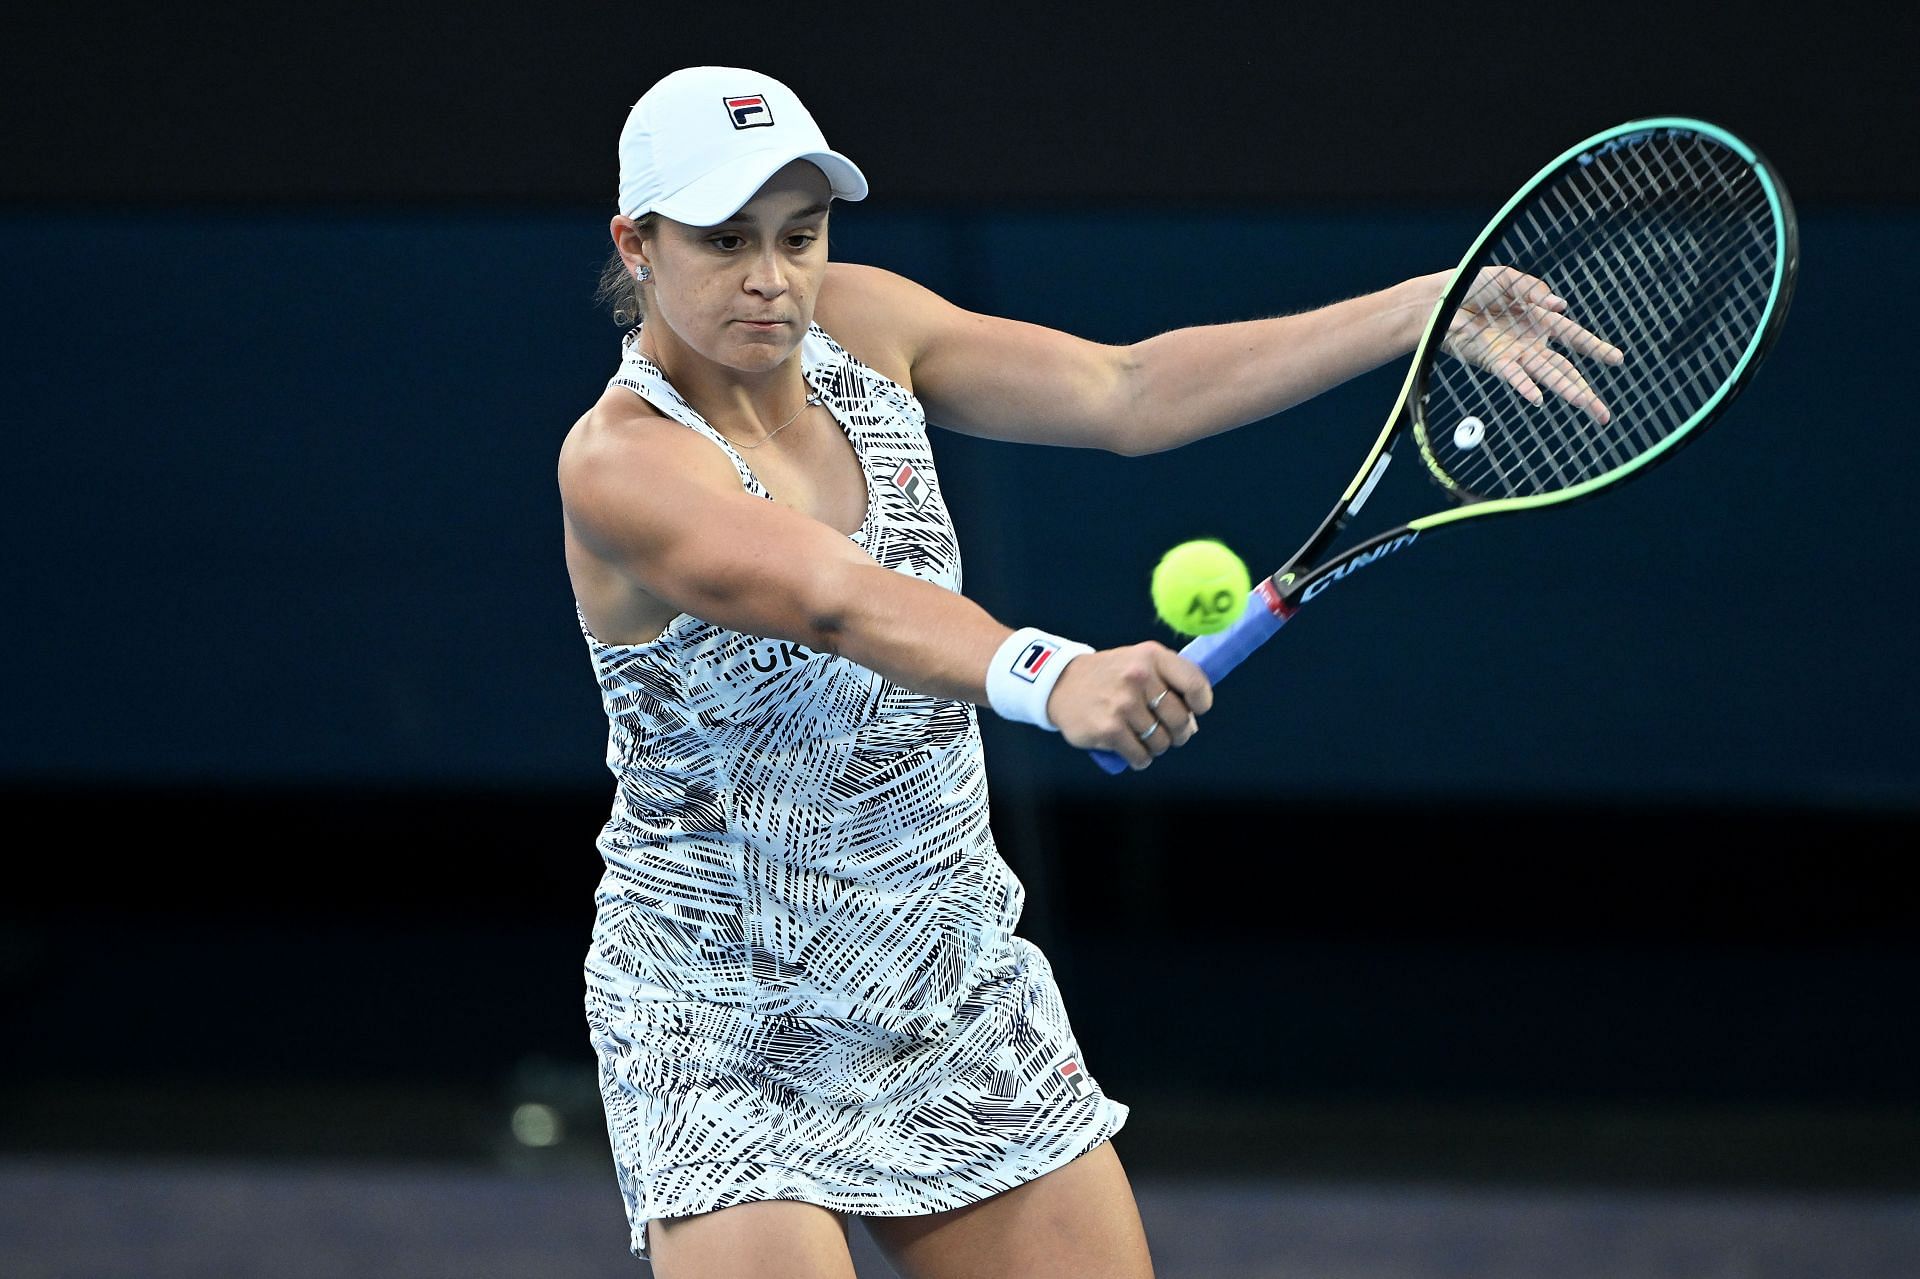 The World No. 1 Ashleigh Barty dropped just one game against Lesia Tsurenko